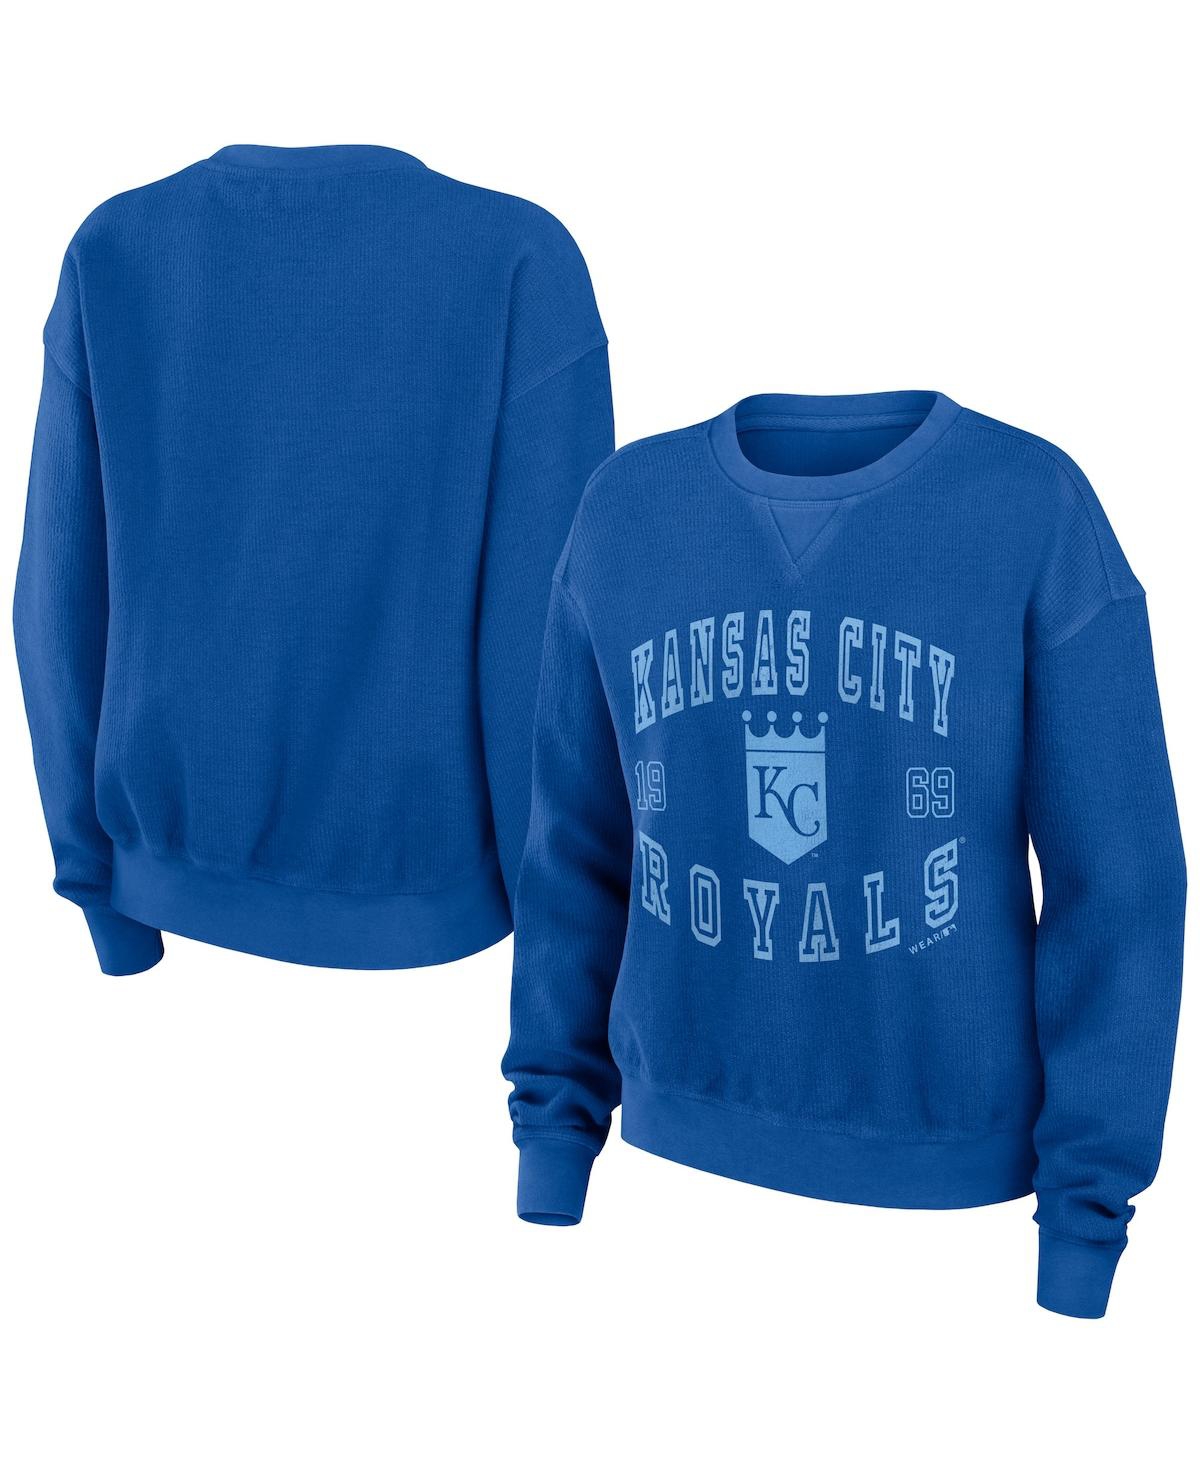 Shop Wear By Erin Andrews Women's  Royal Distressed Kansas City Royals Vintage-like Cord Pullover Sweatshi